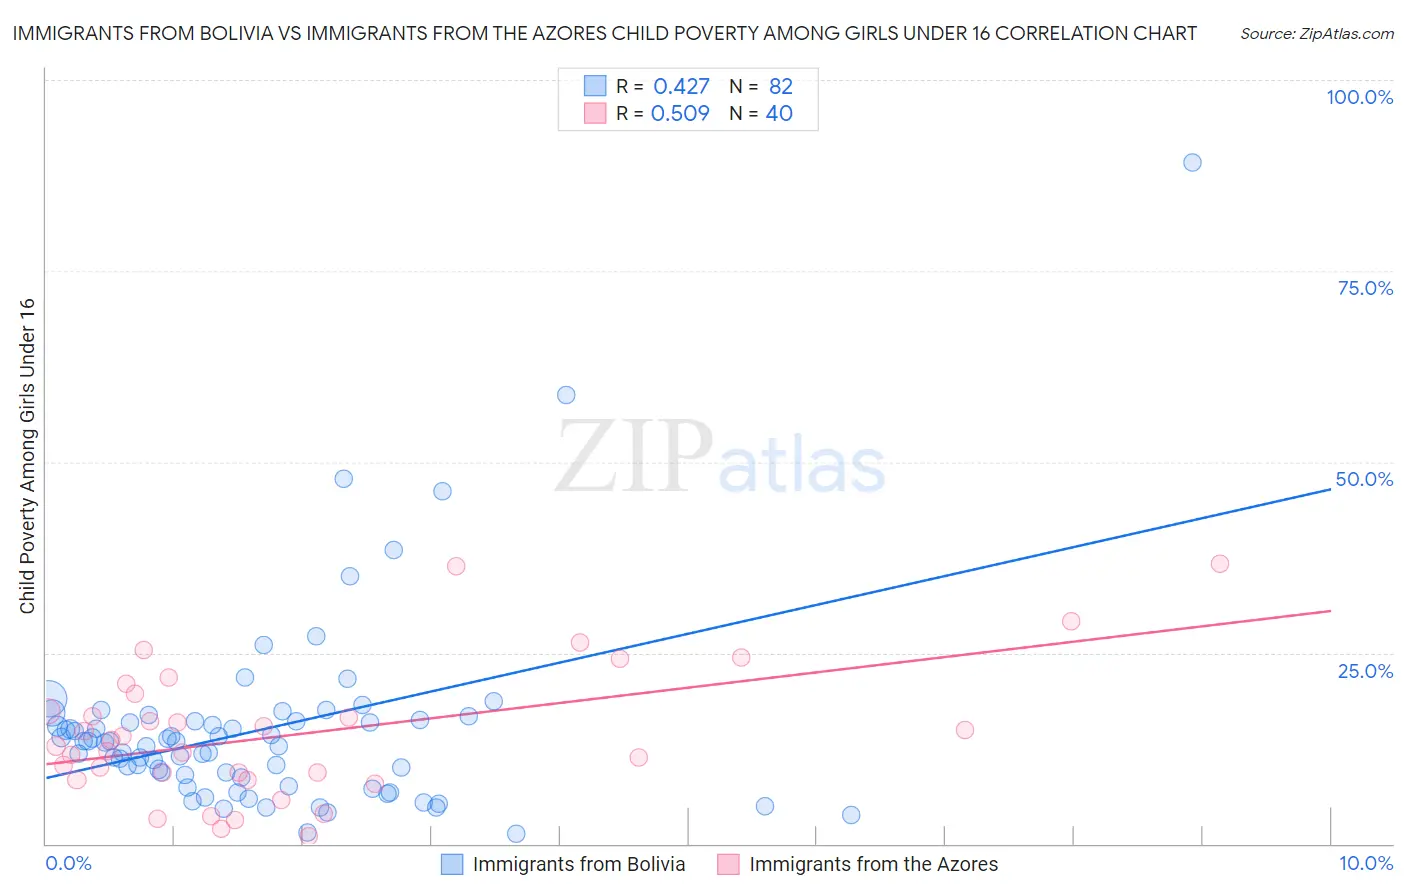 Immigrants from Bolivia vs Immigrants from the Azores Child Poverty Among Girls Under 16